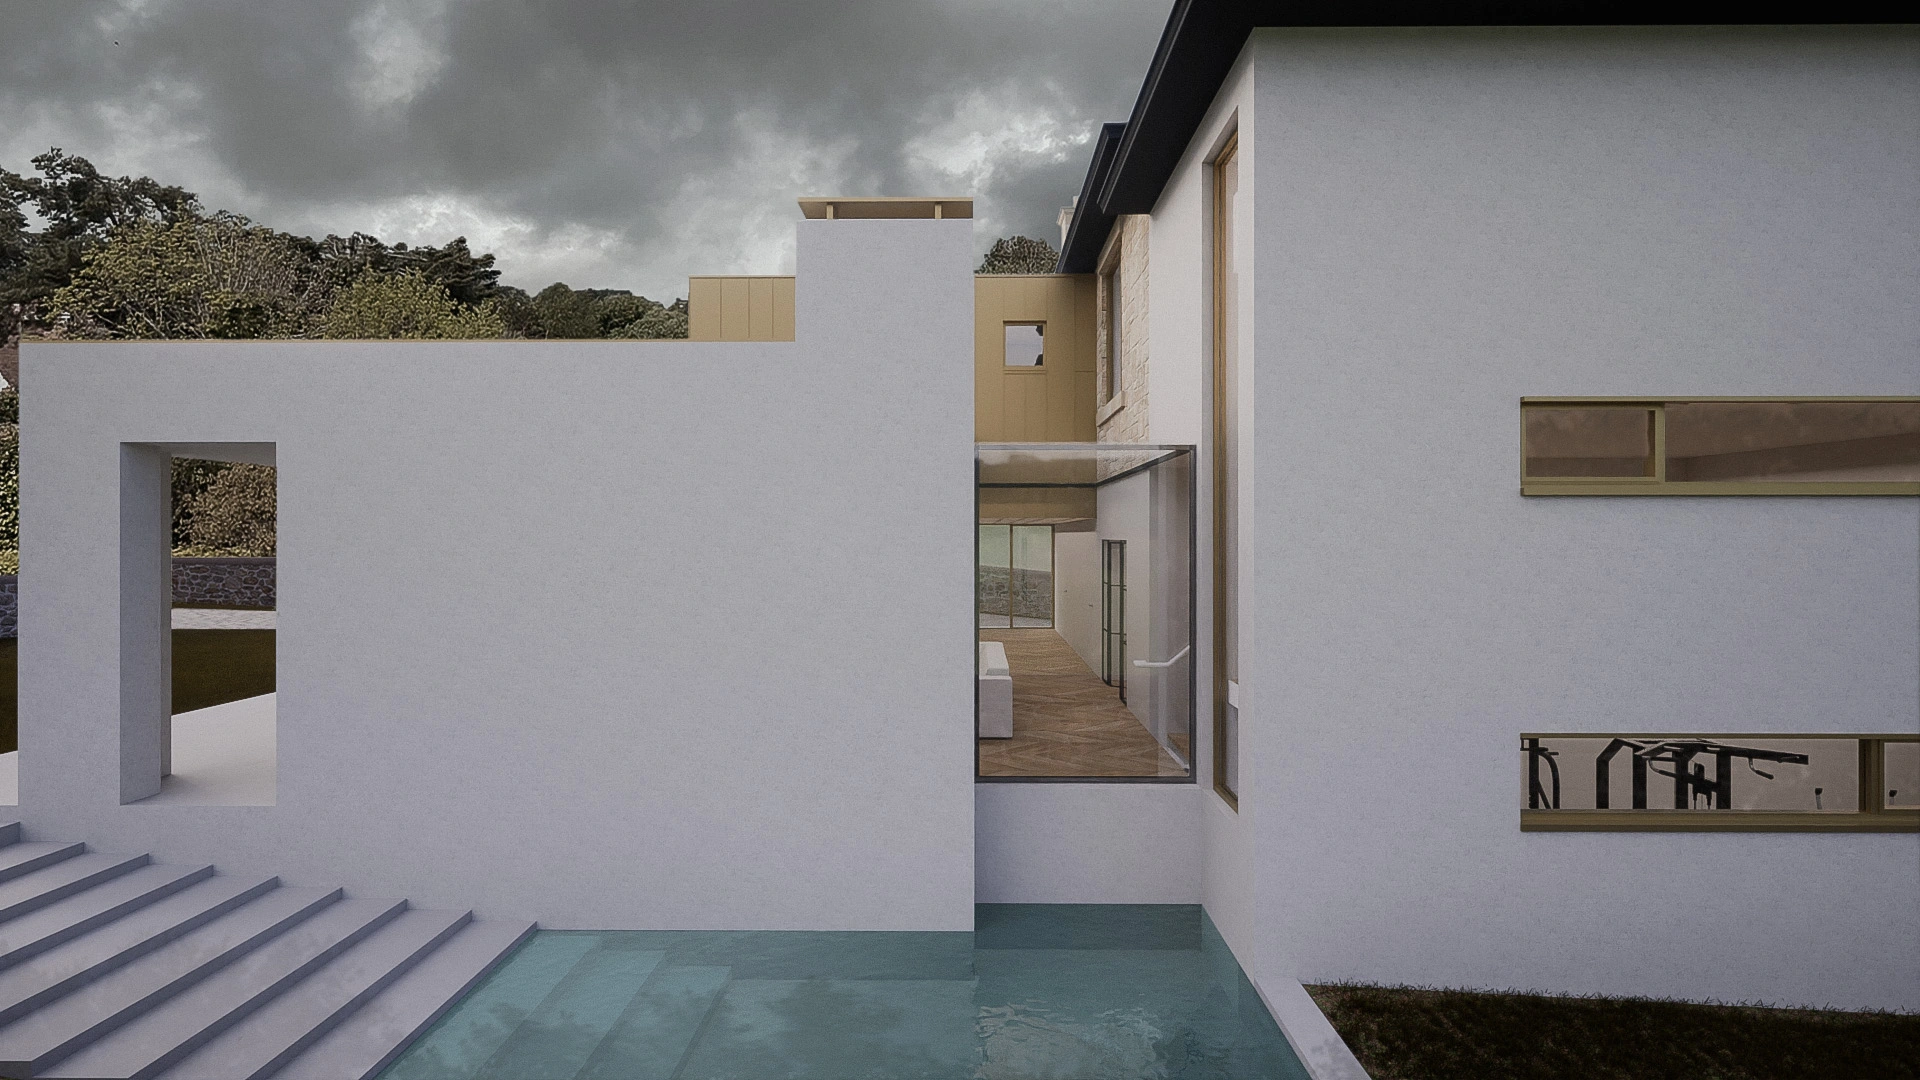 A new home extension in Glasgow Southside, with white render walls, blonde sandstone, and golden zinc cladding, with three storeys and a pool with steps leading into the water.